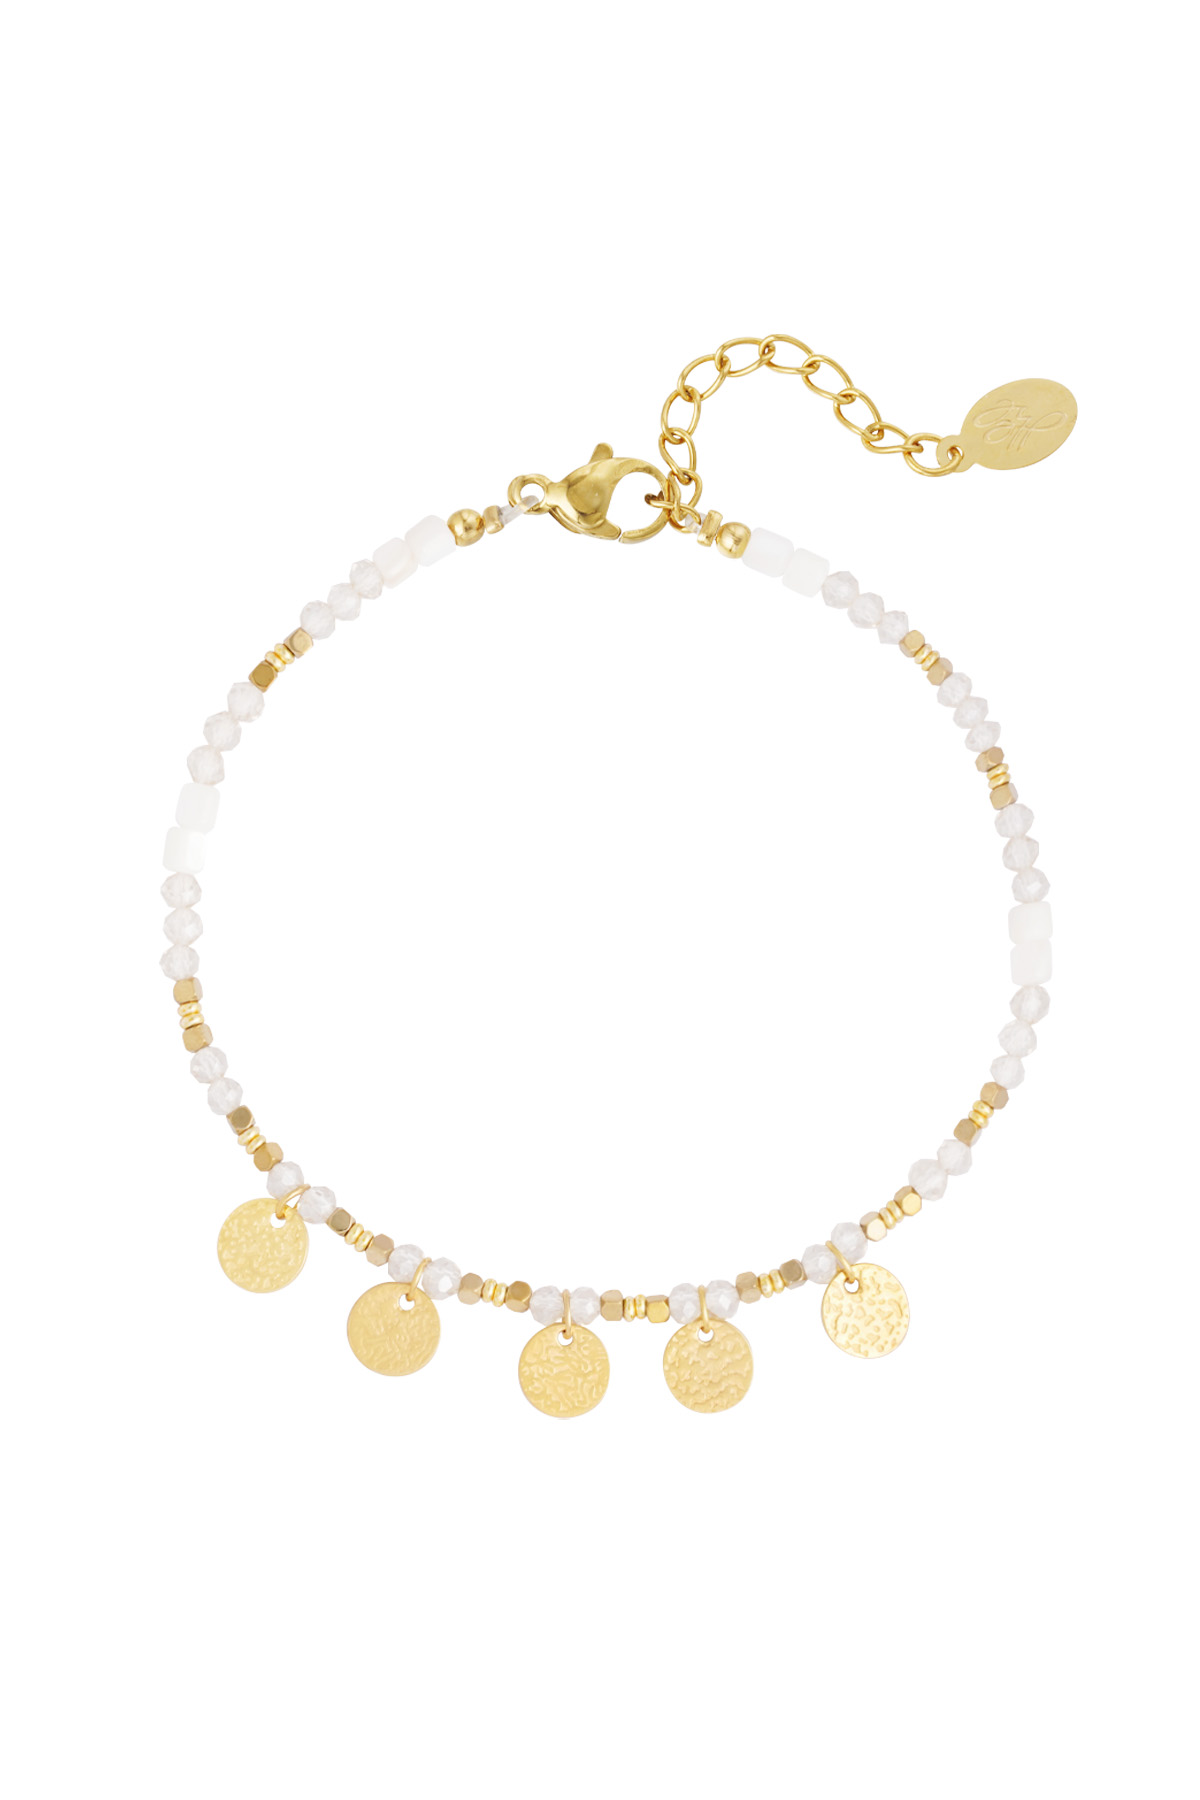 Anklet with coin charms - white gold 